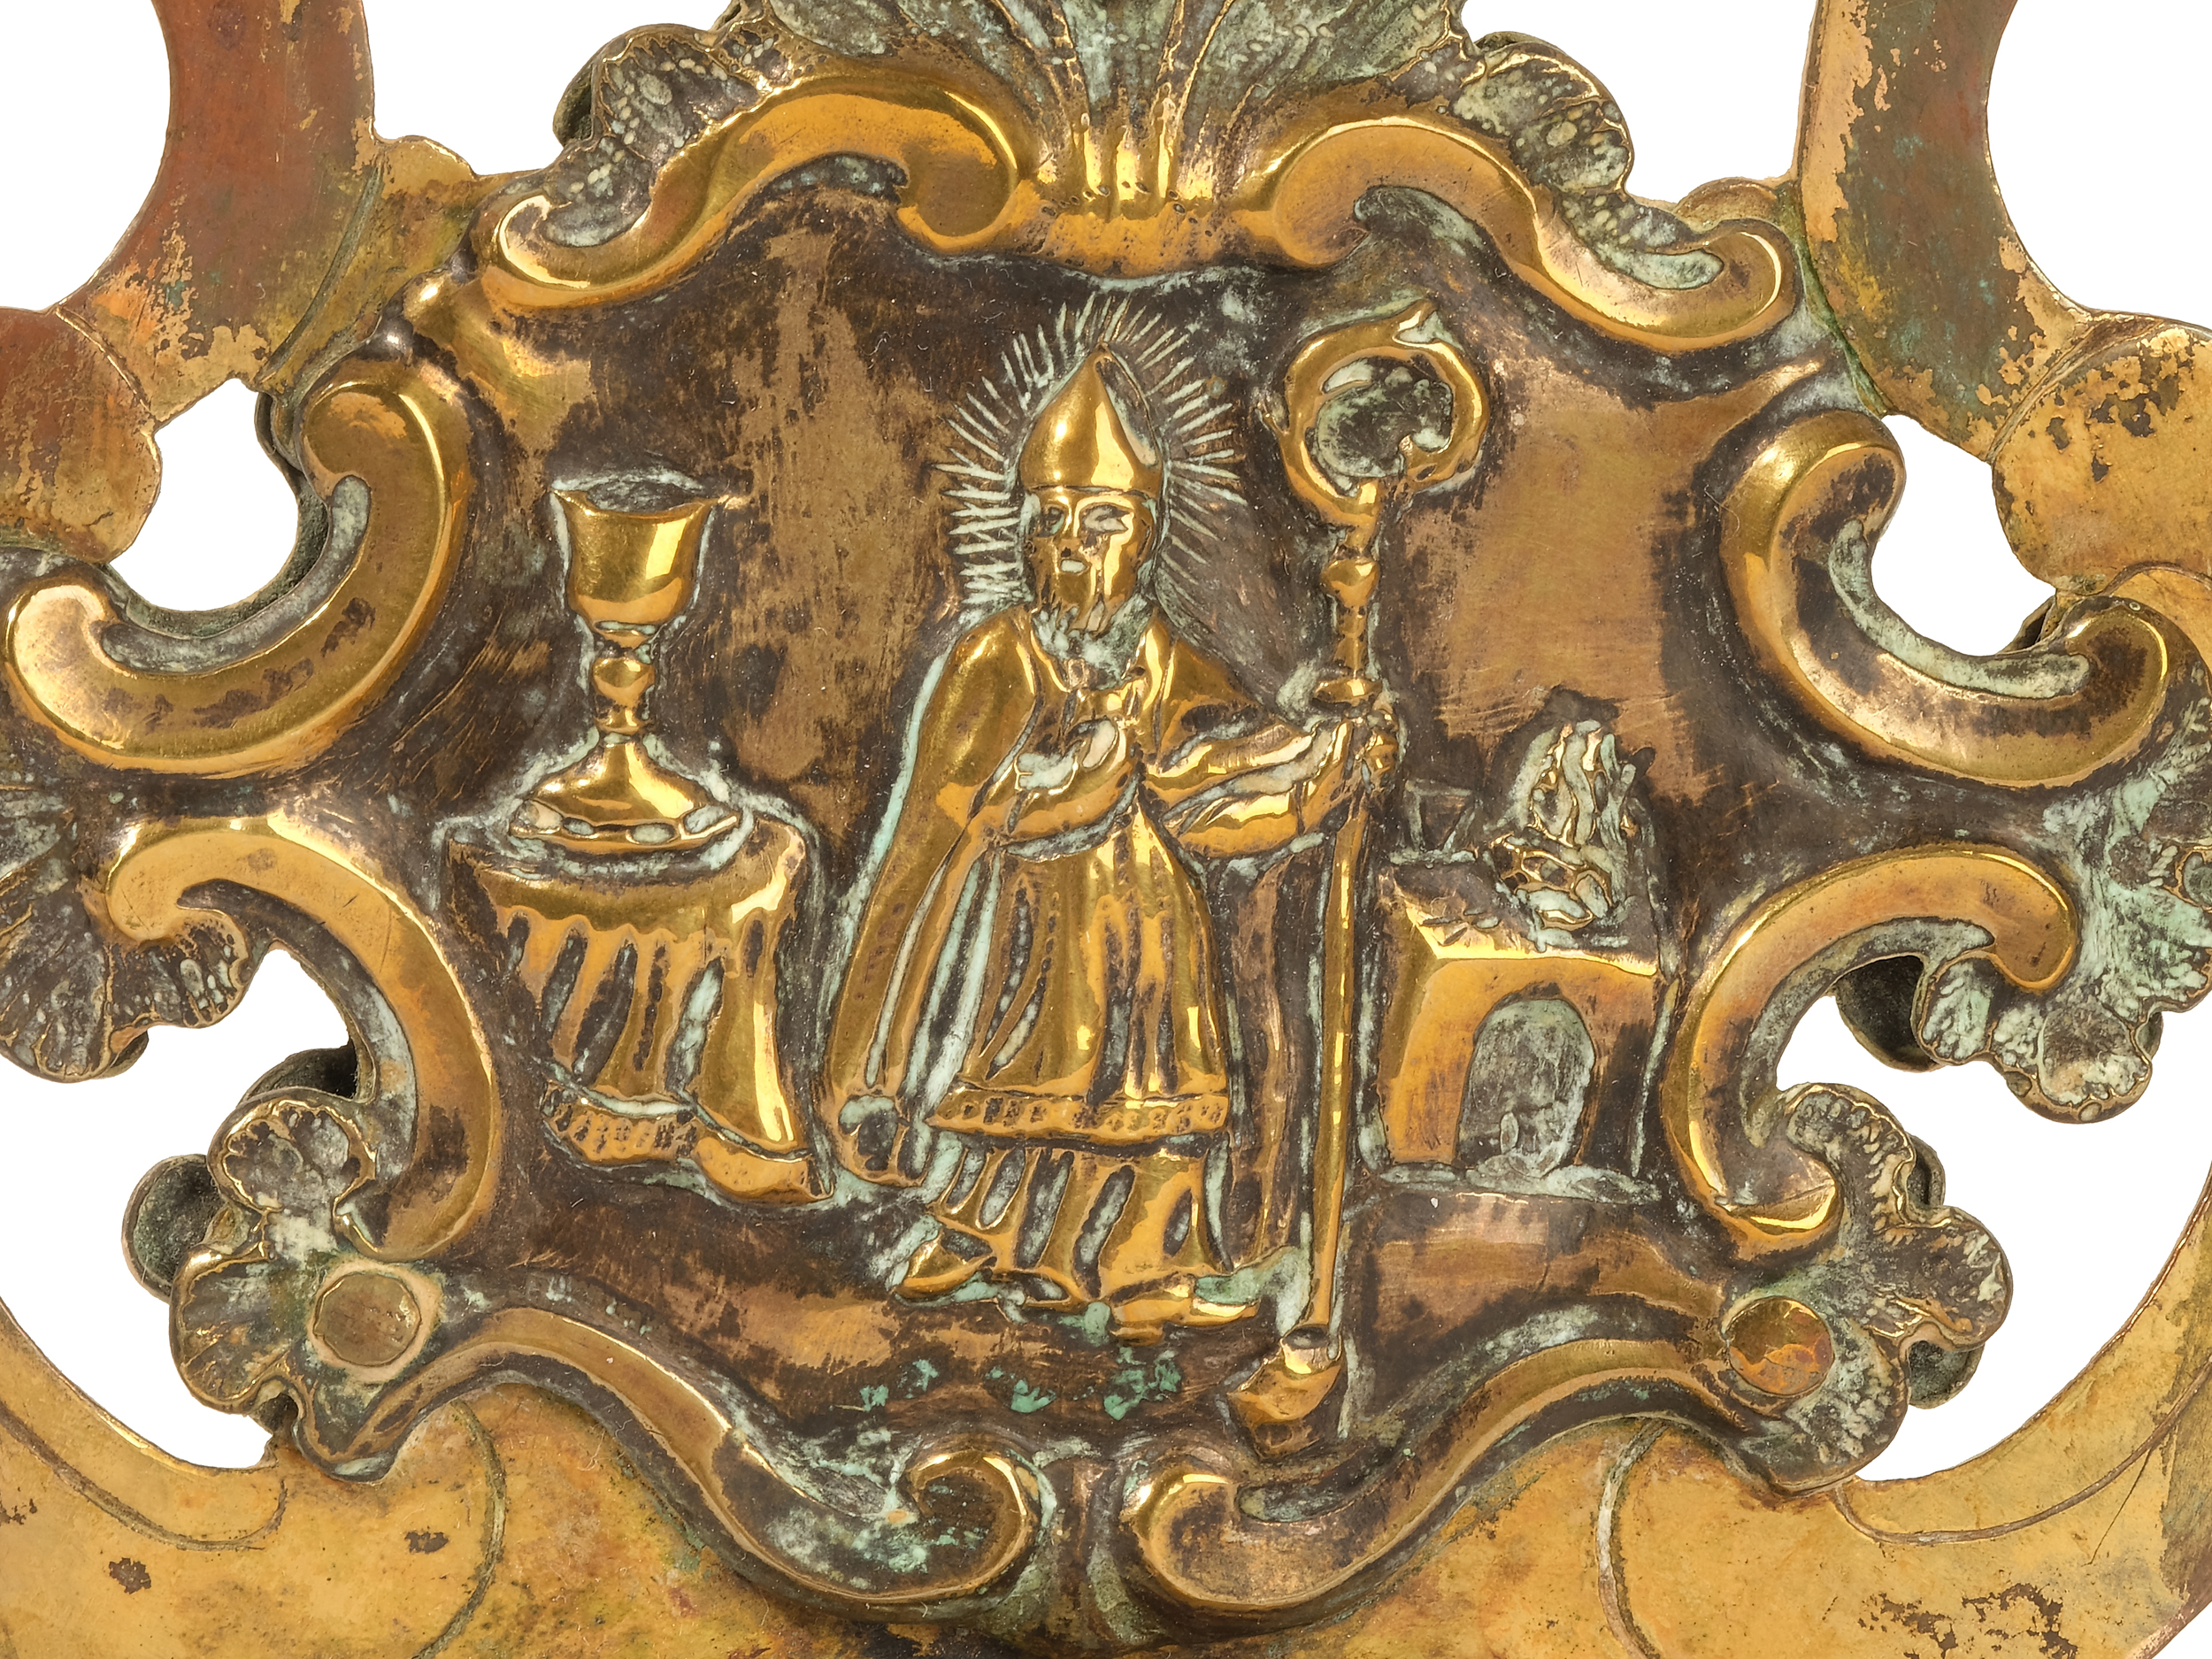 Top of a processional pole, 
South German, 
18th century - Image 3 of 6